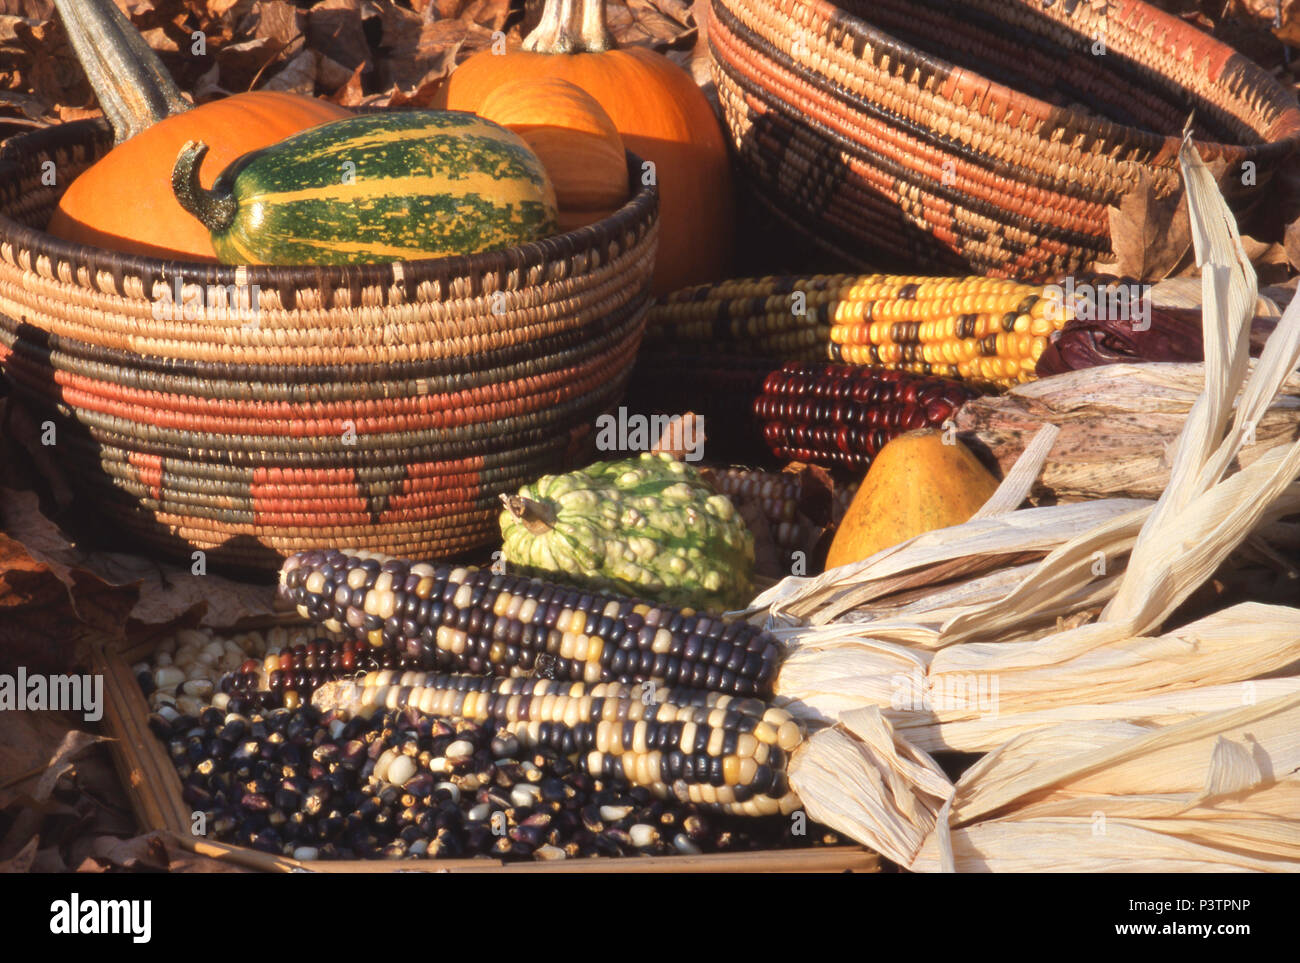 Different colors of Native American corn (maize) and squash. Photograph Stock Photo